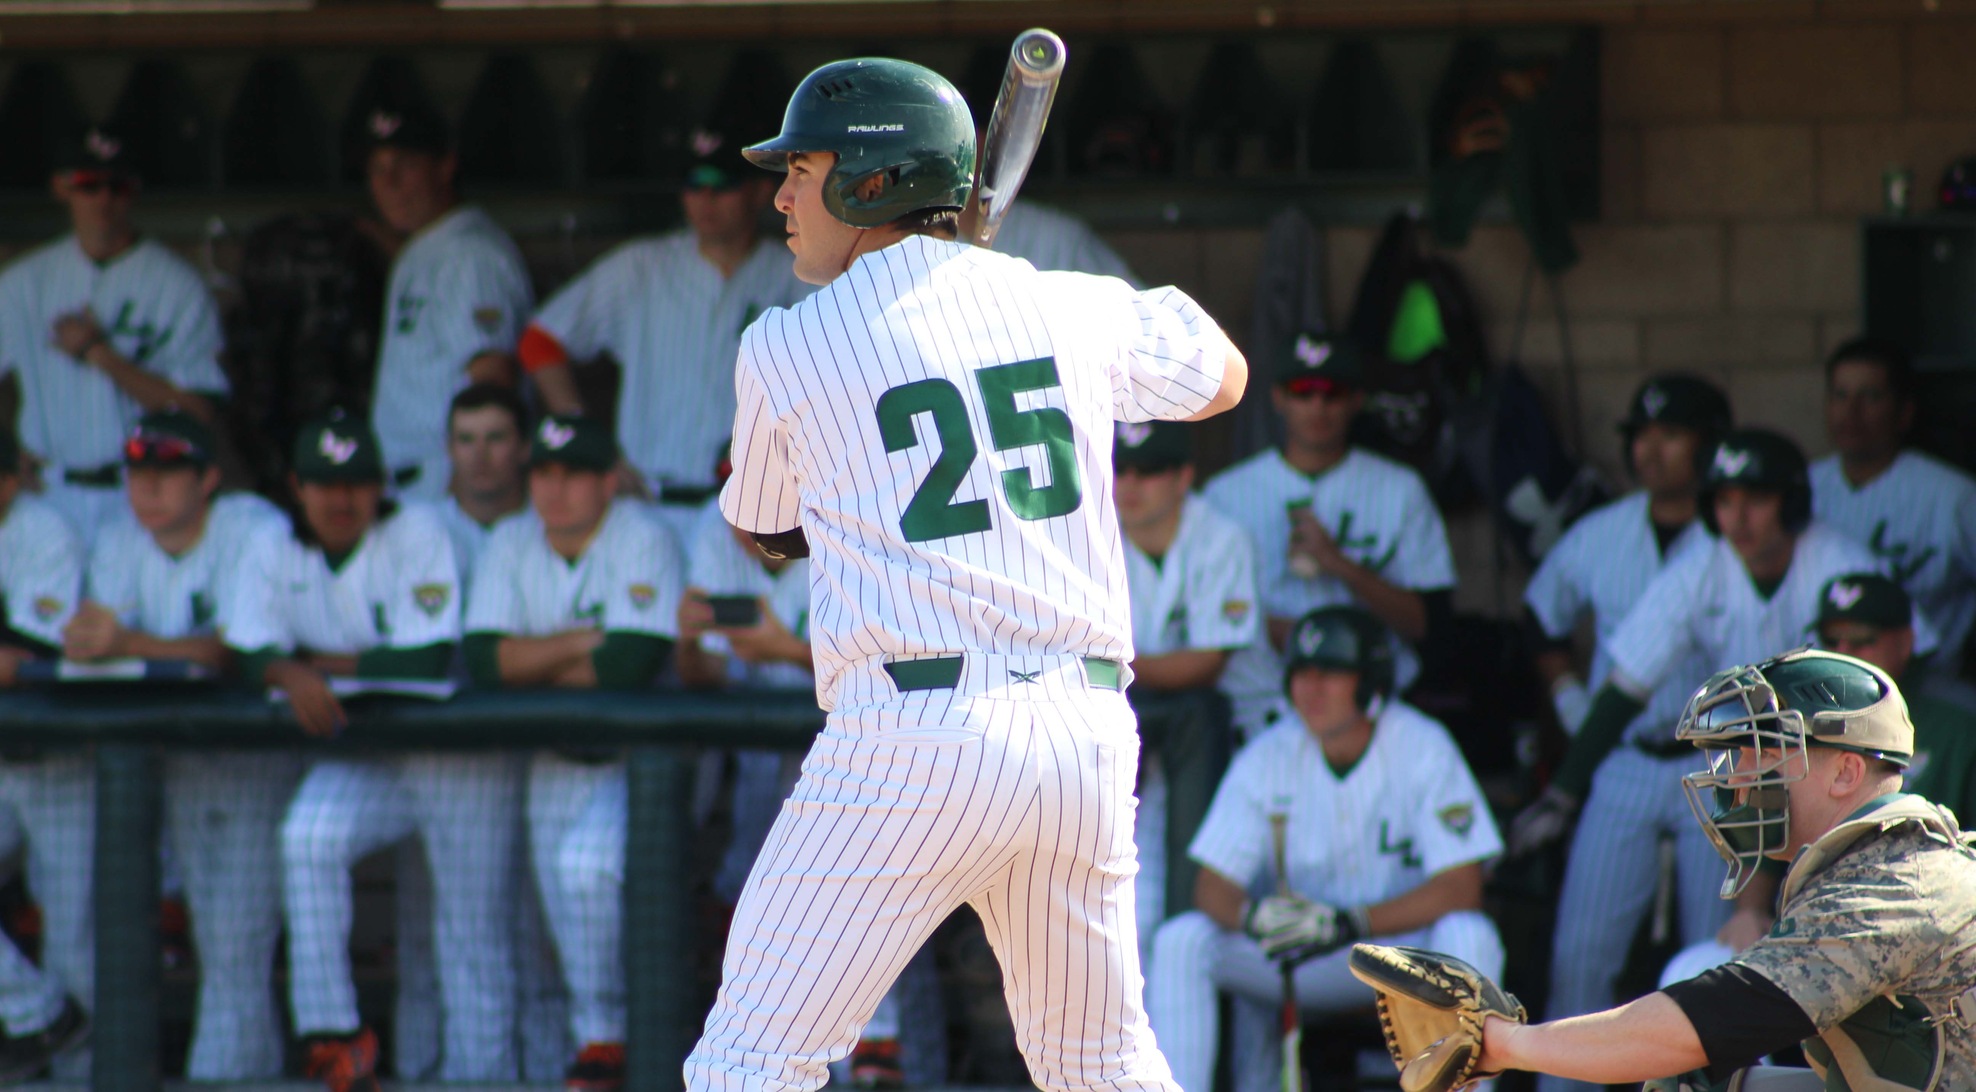 Baseball overcomes five-run deficit to beat Stags